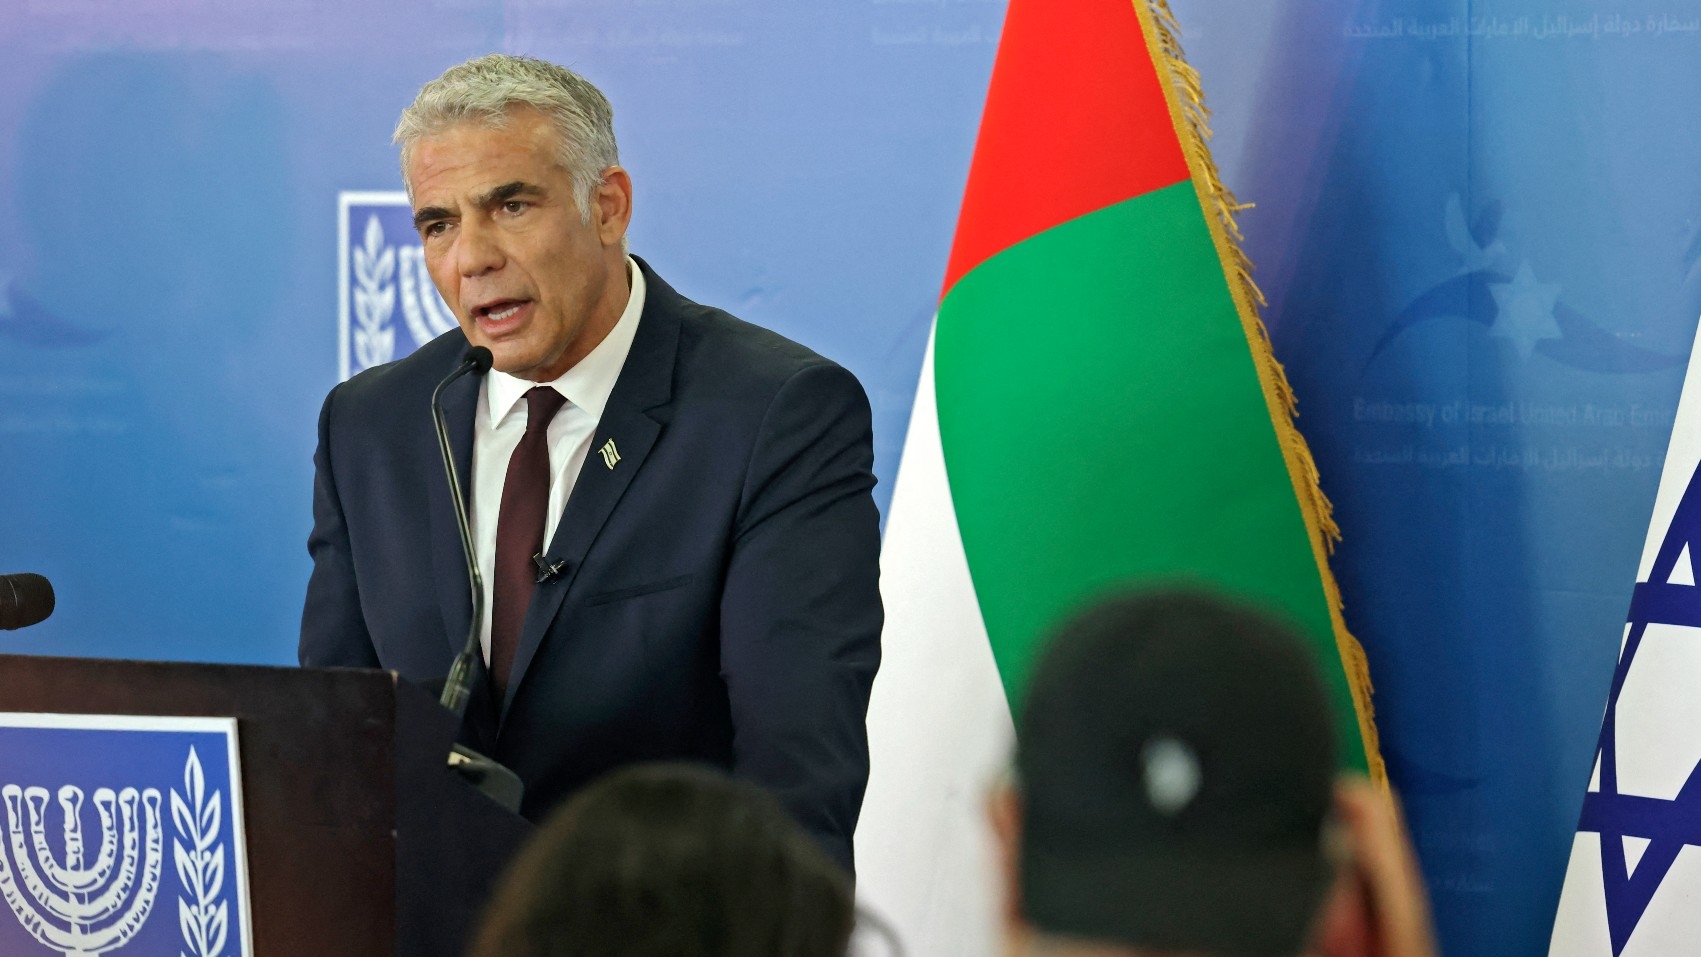 Israeli Foreign Minister Yair Lapid speaks at a press conference at the Israeli consulate in Dubai on 30 June 2021